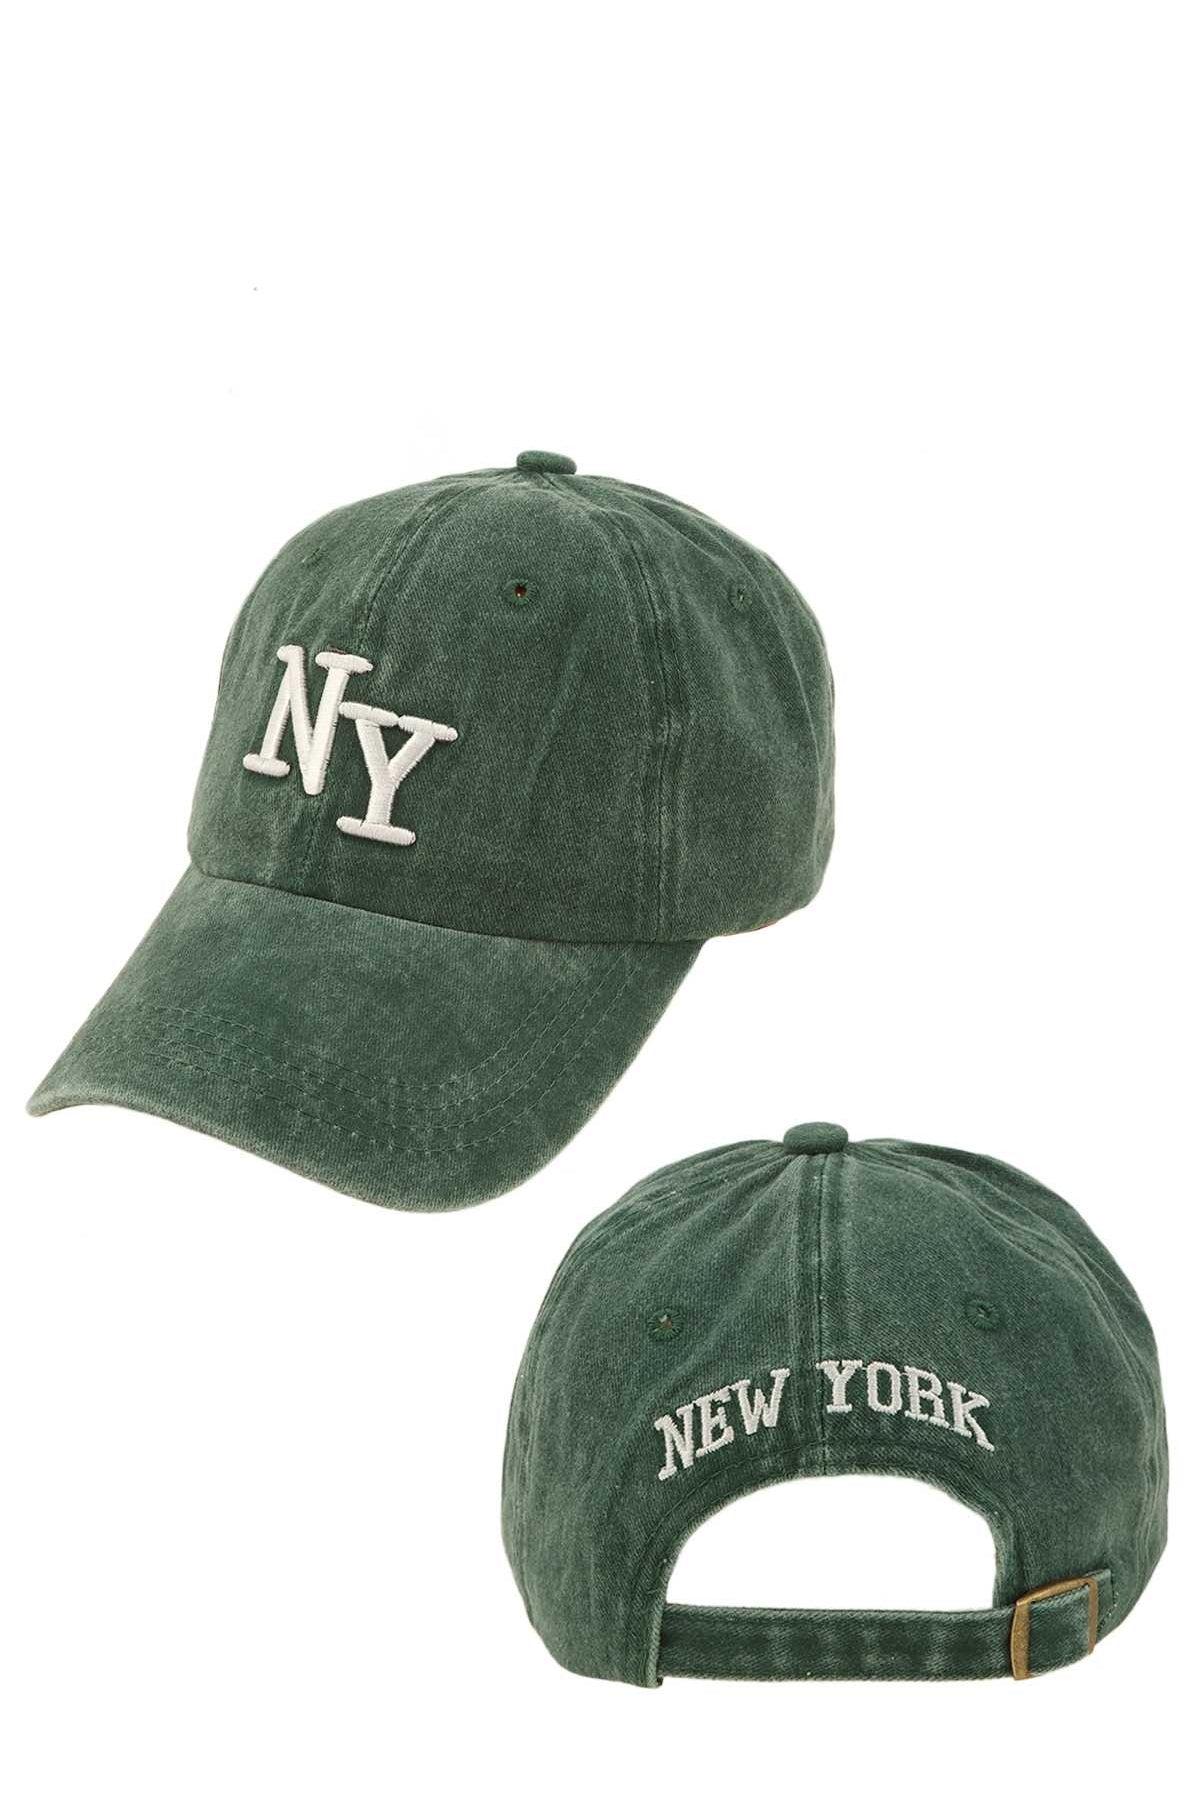 New York State of mind hat